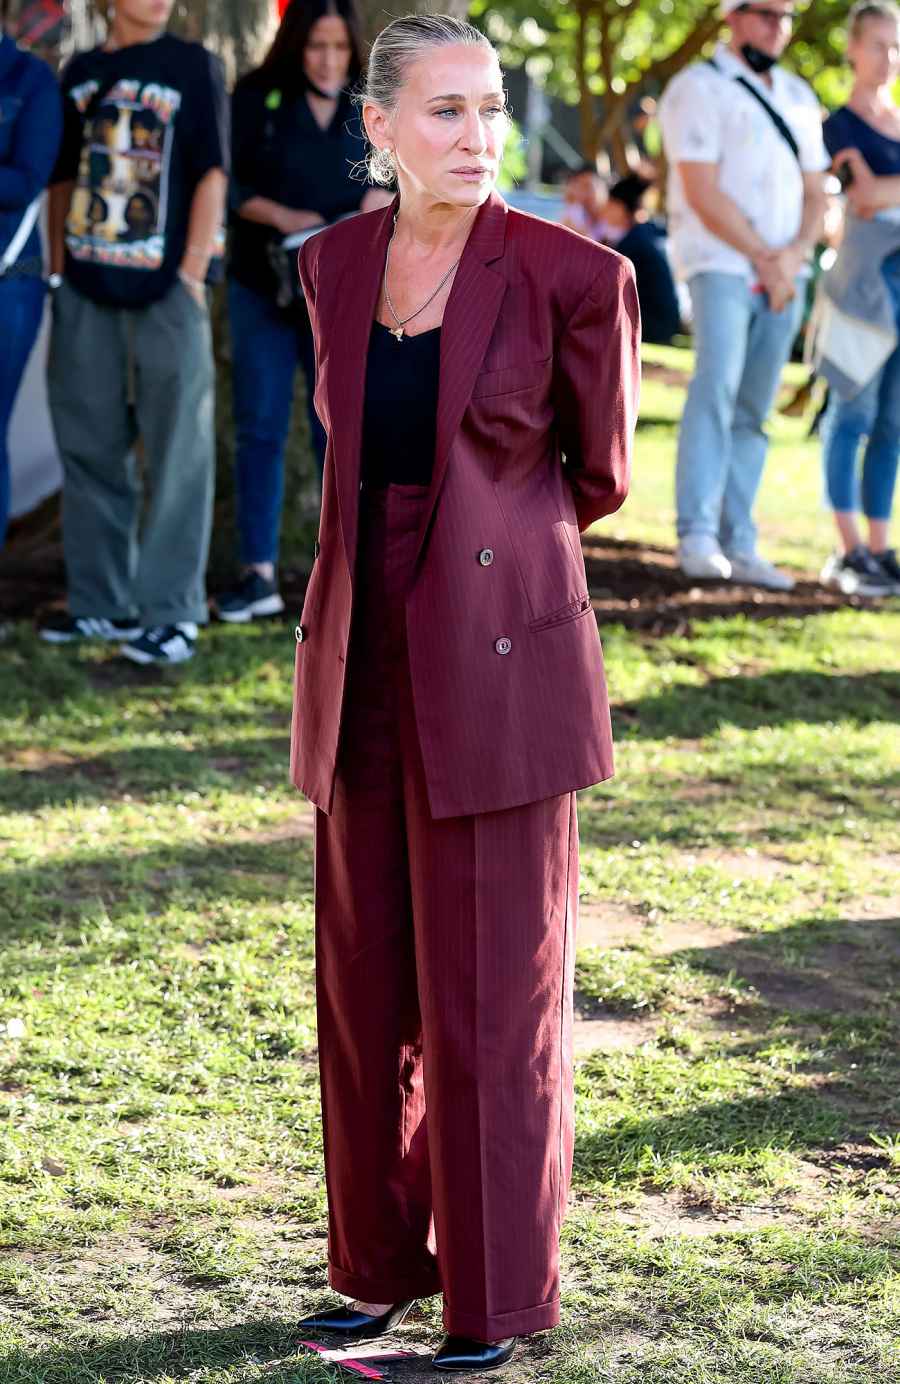 SJP Looks Like a Total Boss in a Maroon Suit While Filming ‘SATC’ Revival